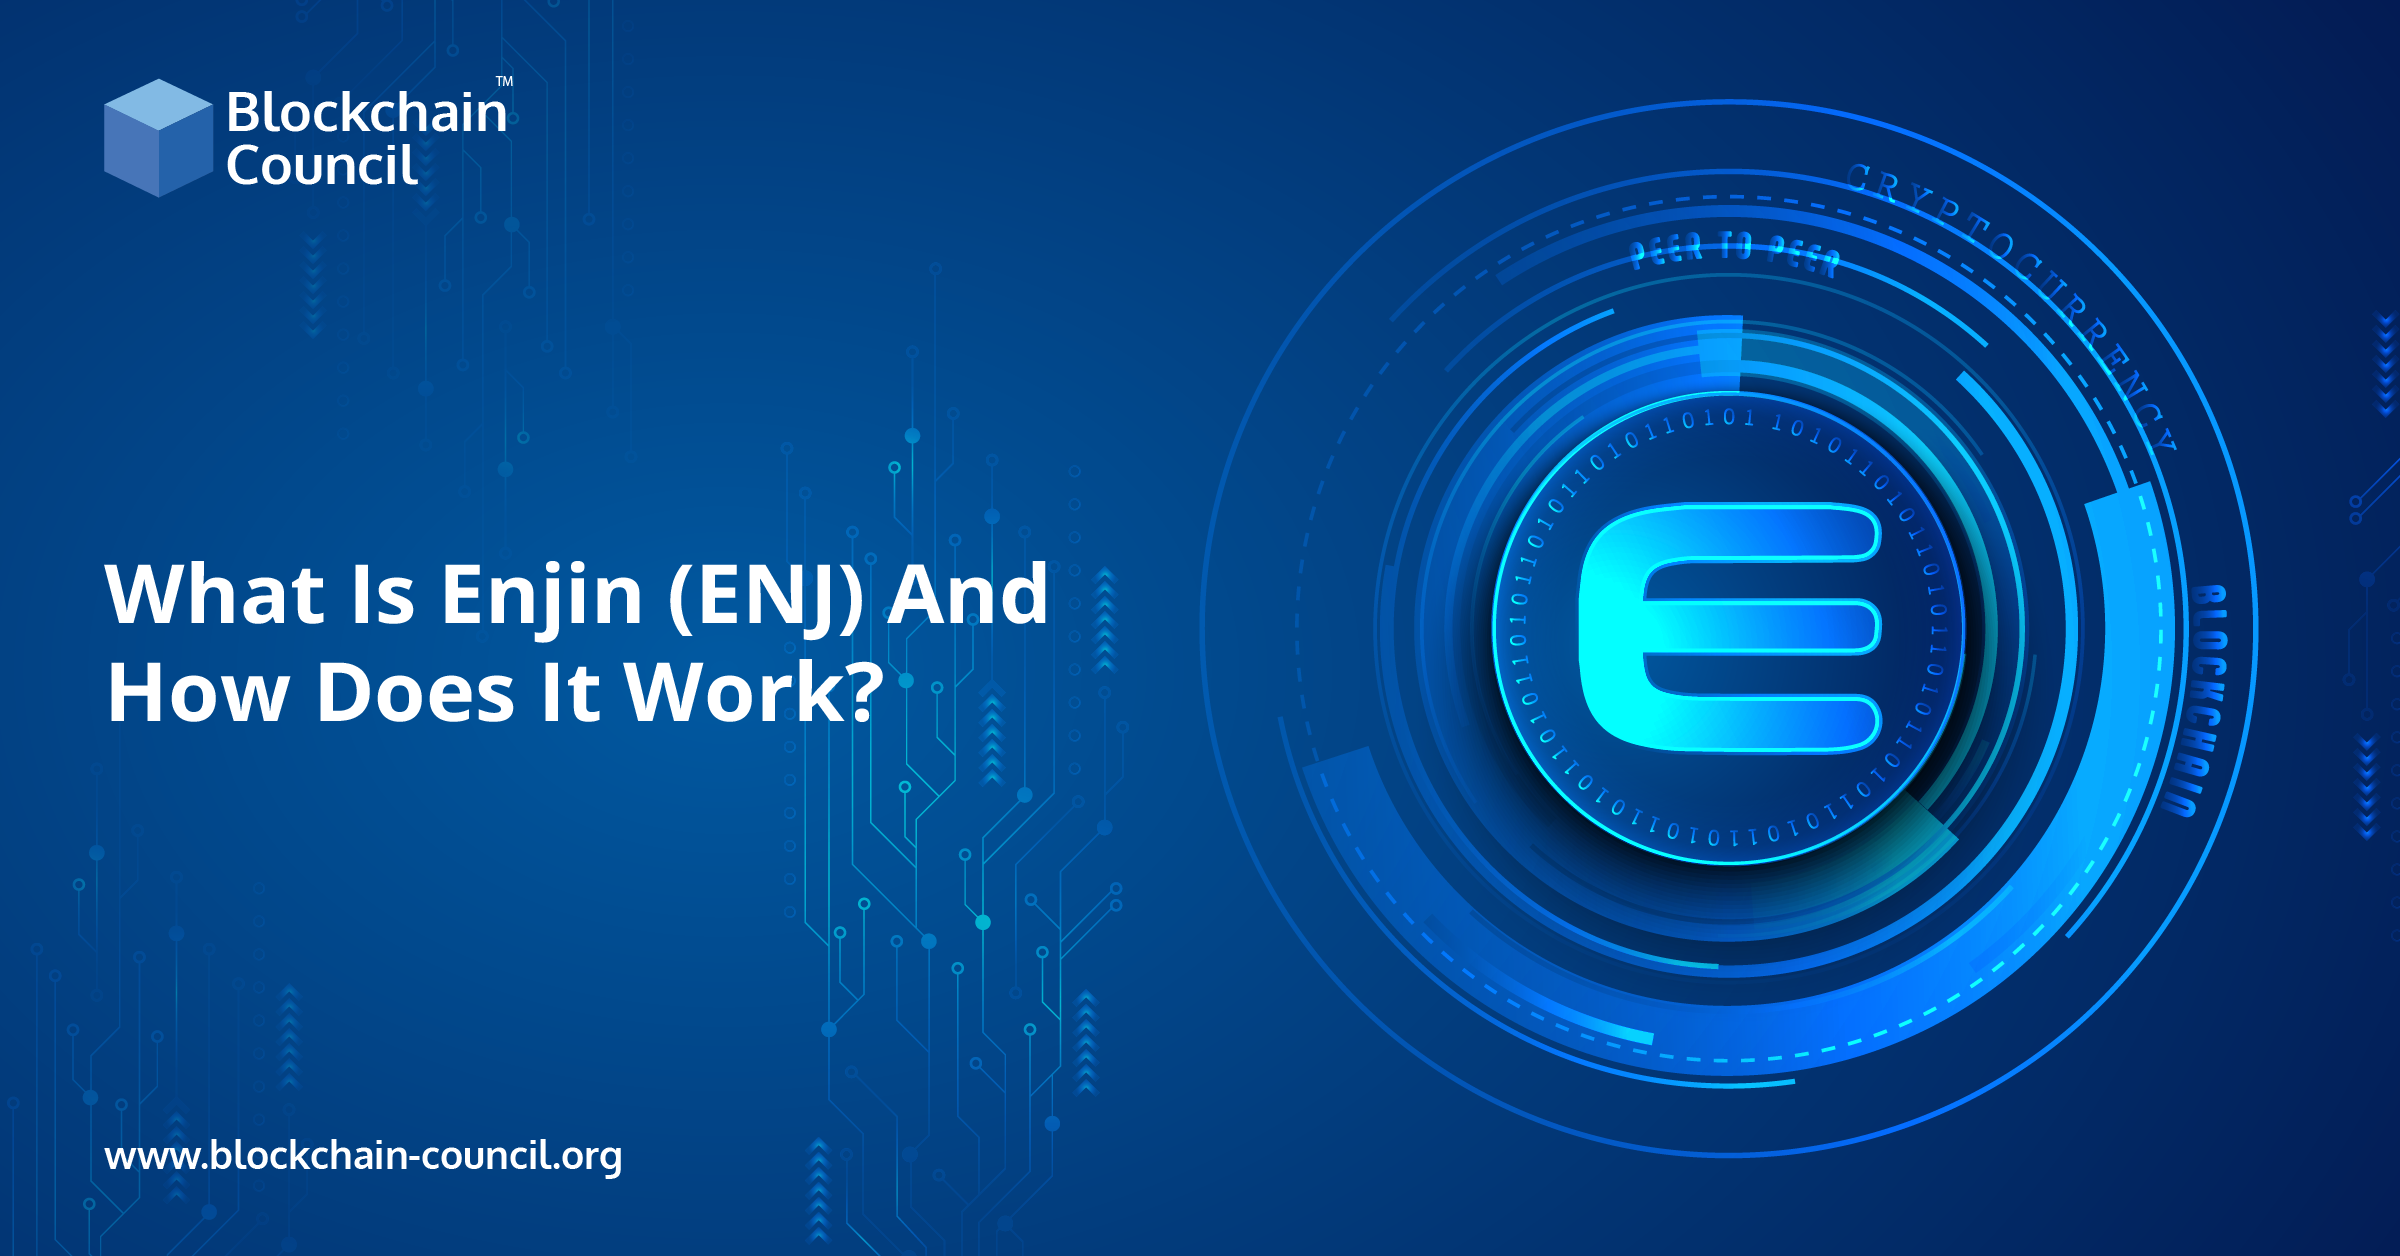 What Is Enjin (ENJ) And How Does It Work